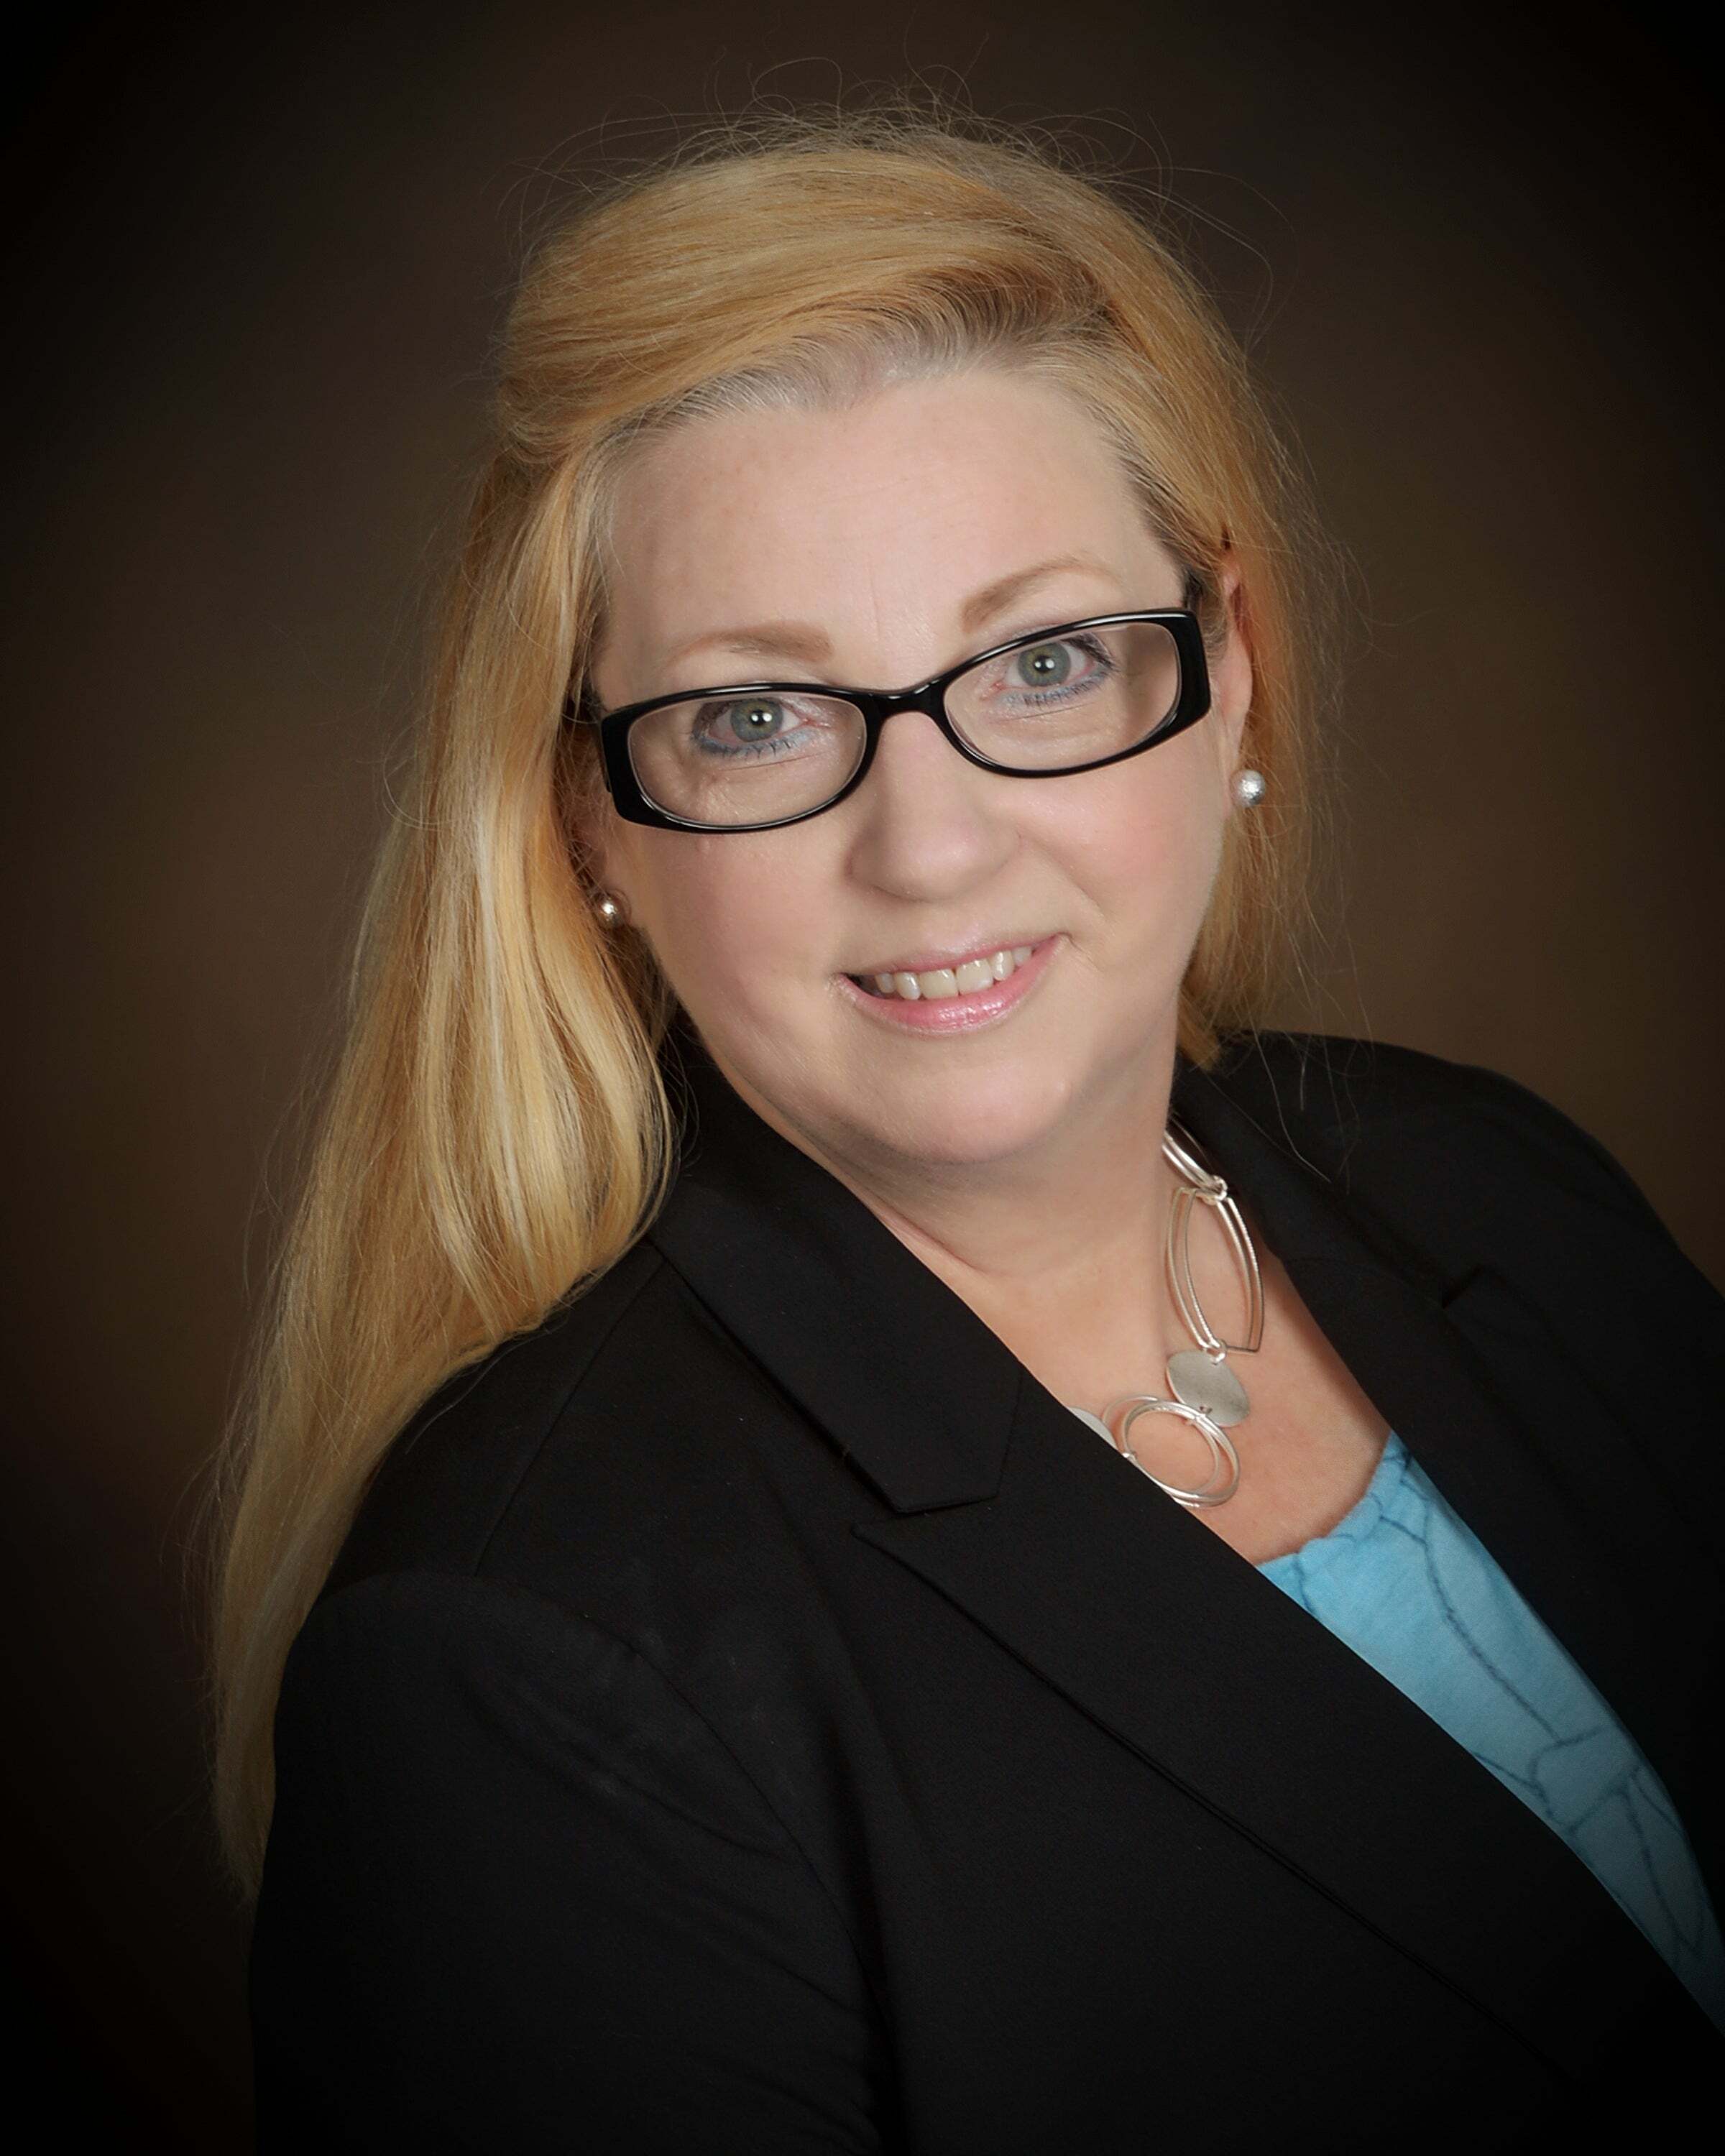 Cindy Burt-McFarland, Real Estate Salesperson in Rogers, Harris McHaney & Faucette